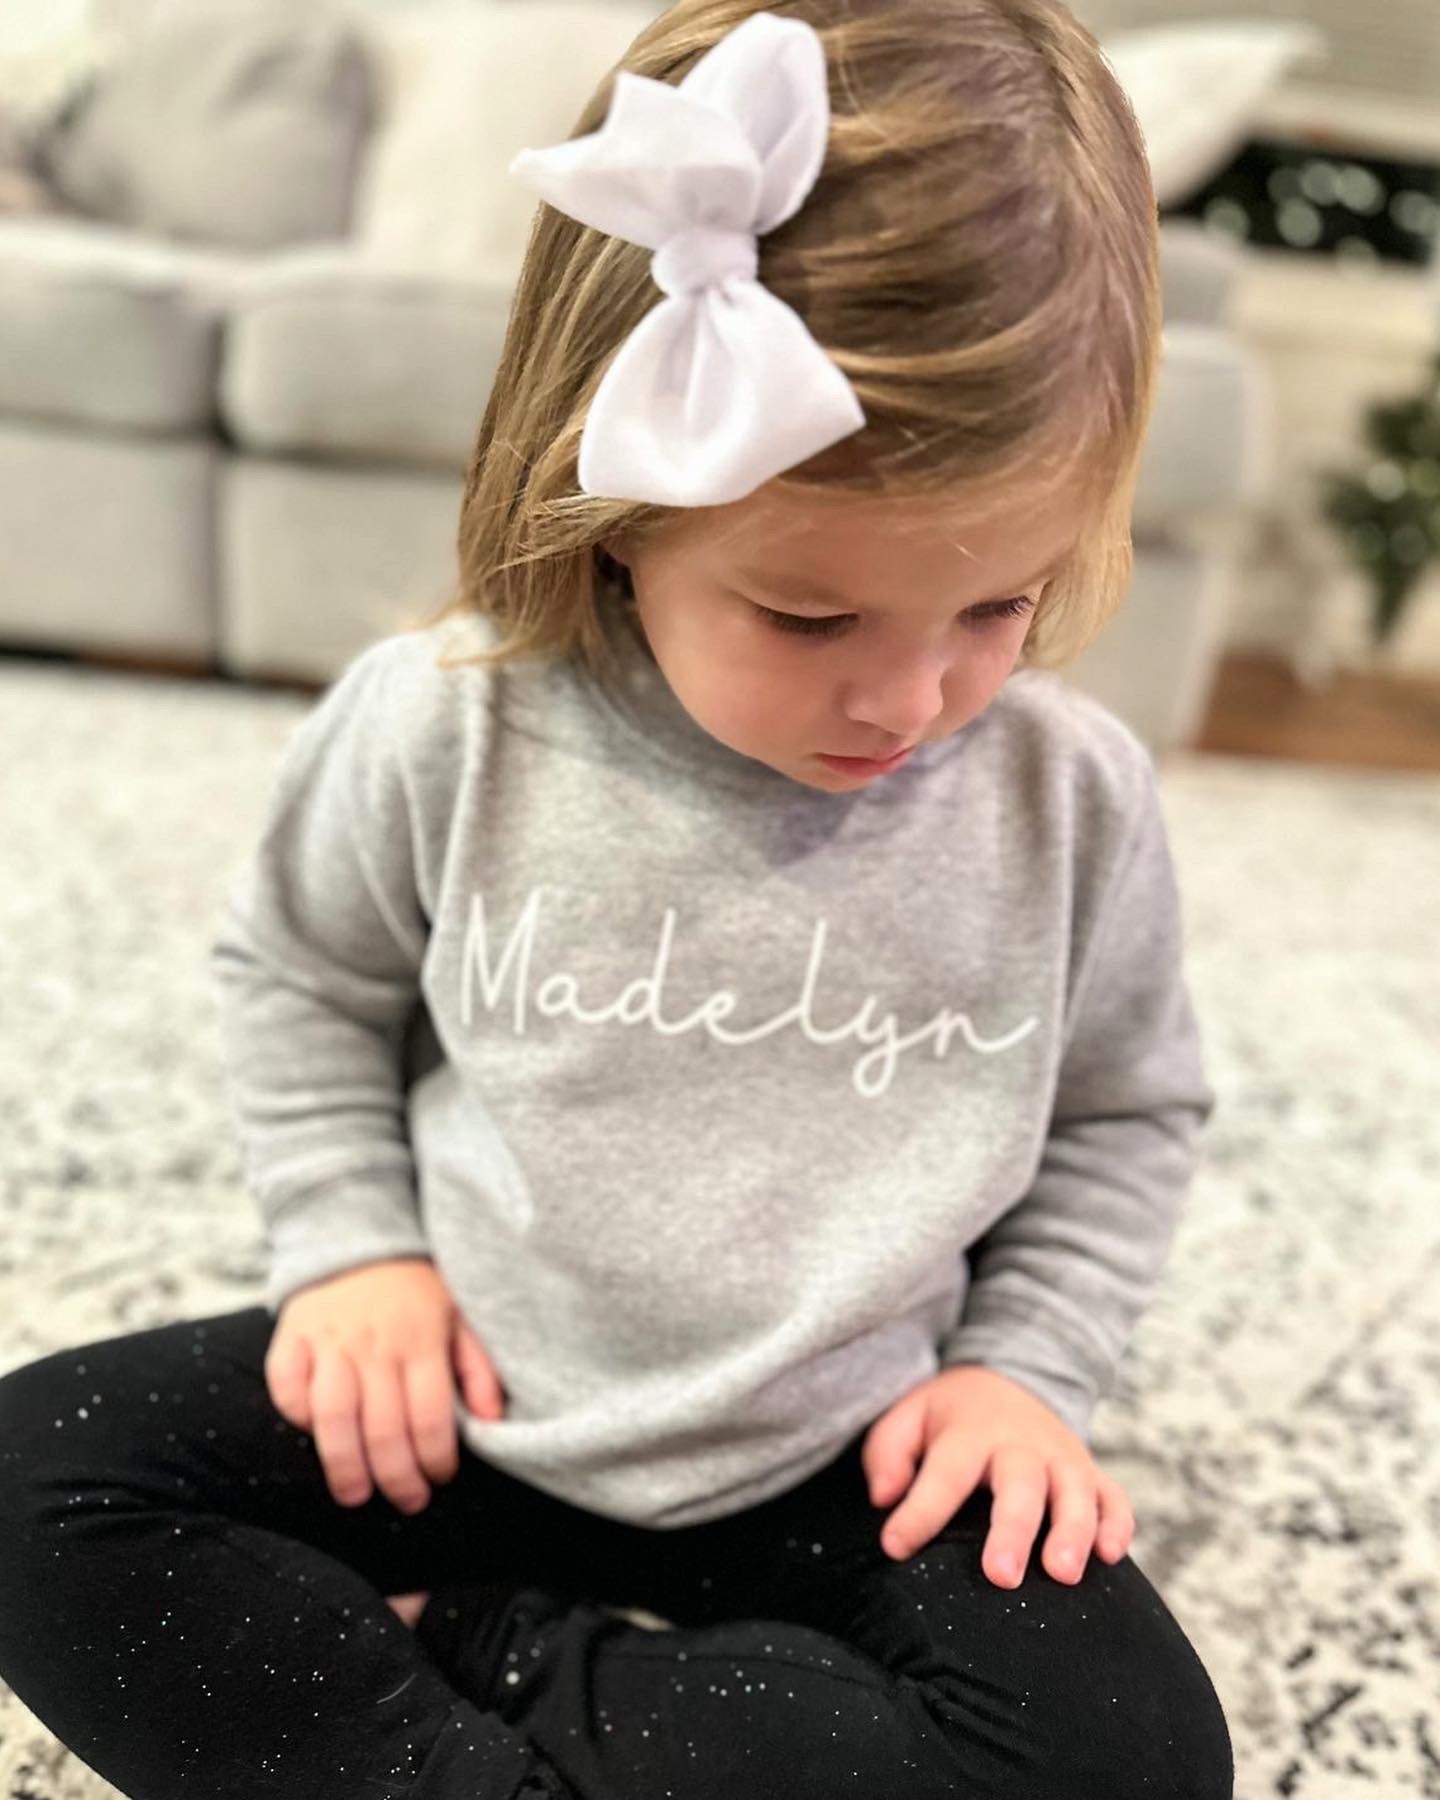 Toddler personalized crewneck - 6 fonts